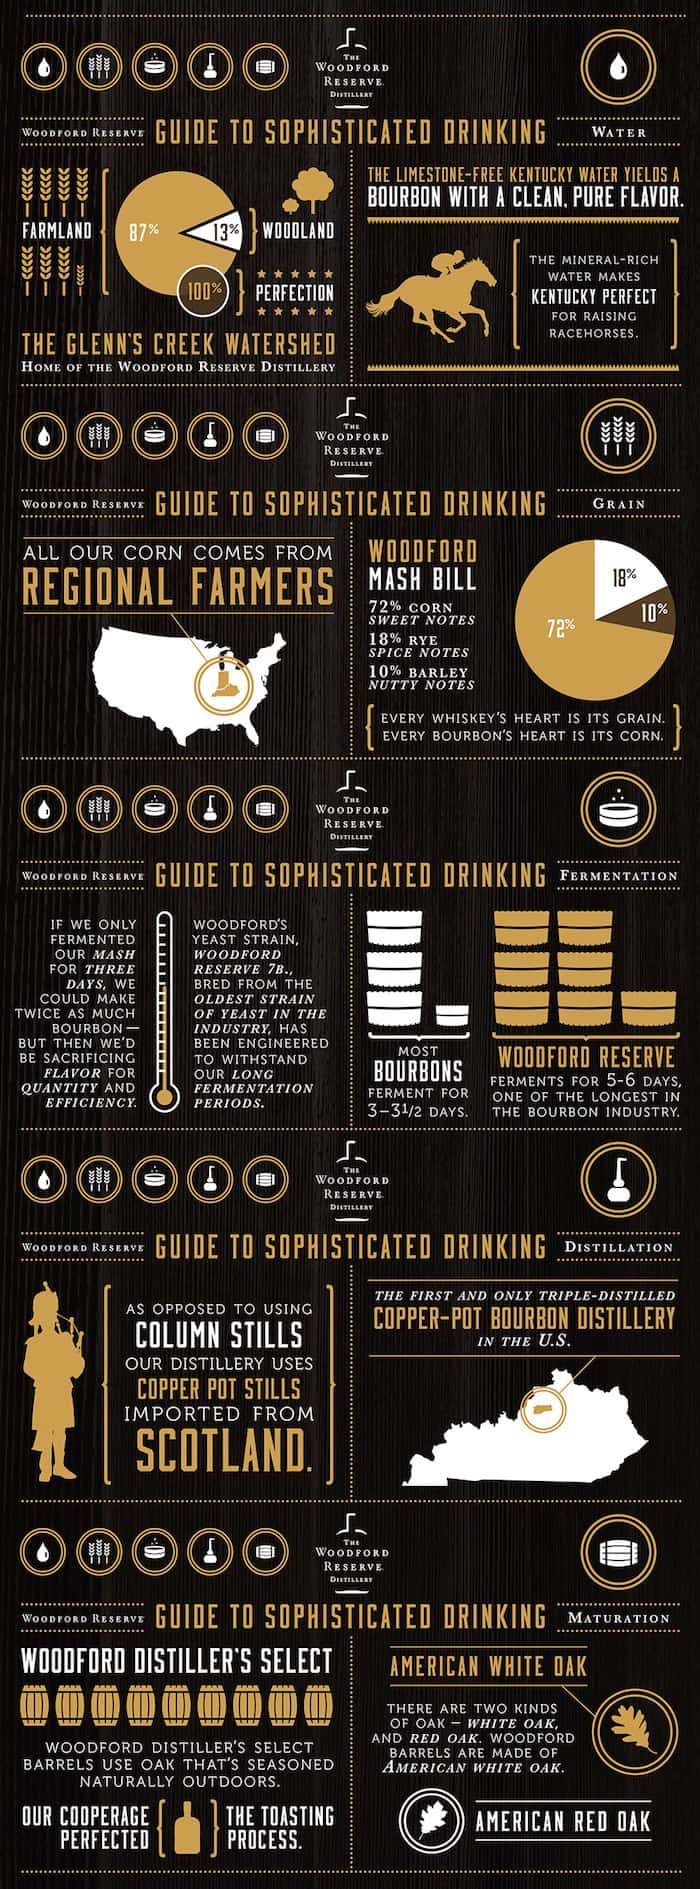 Woodford Reserve Infographic